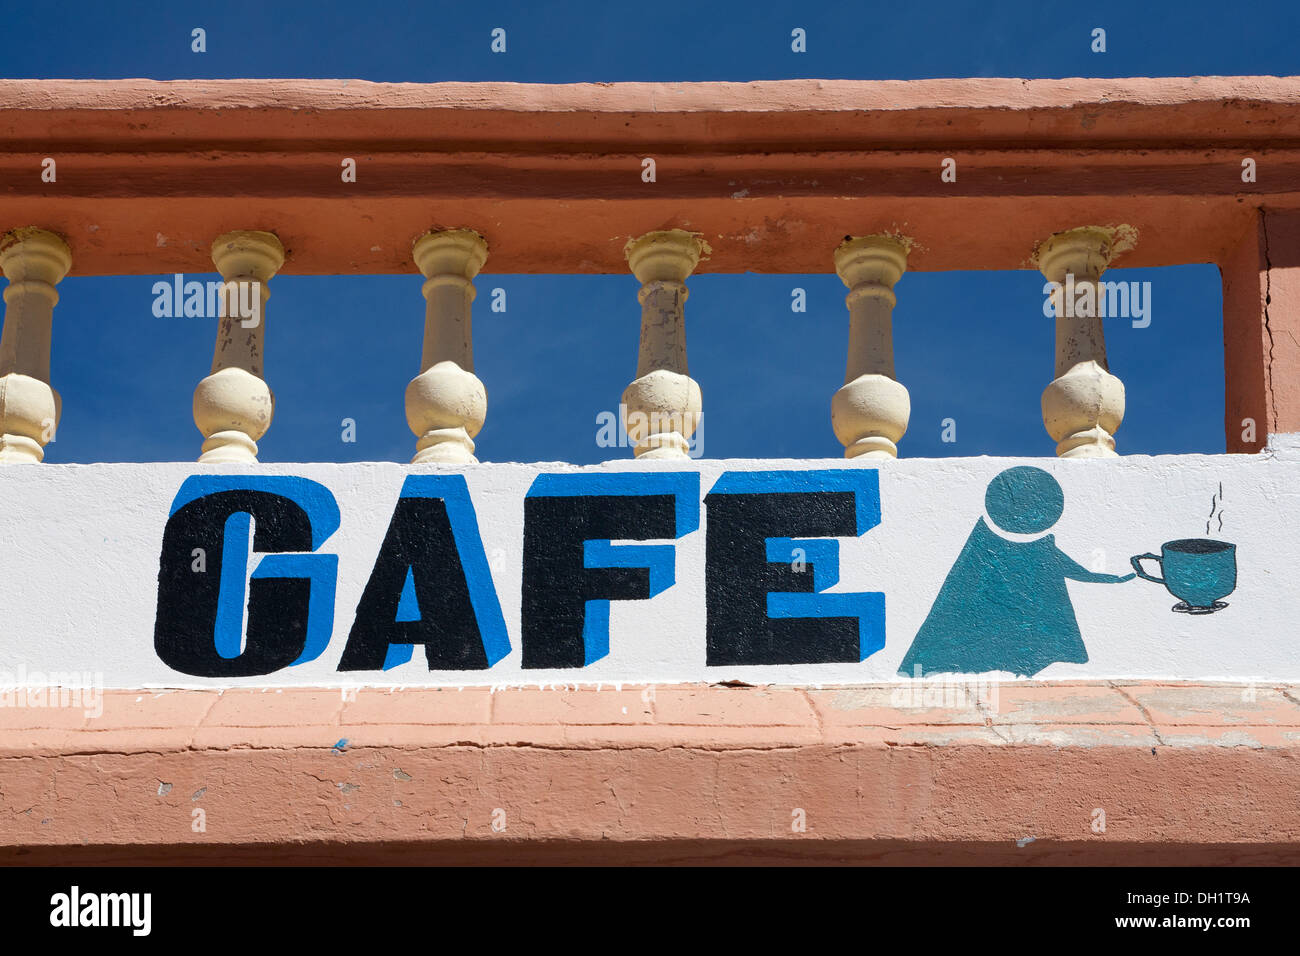 Detail of painted cafe graphics under a balustrade and against a bright blue sky Morocco Stock Photo